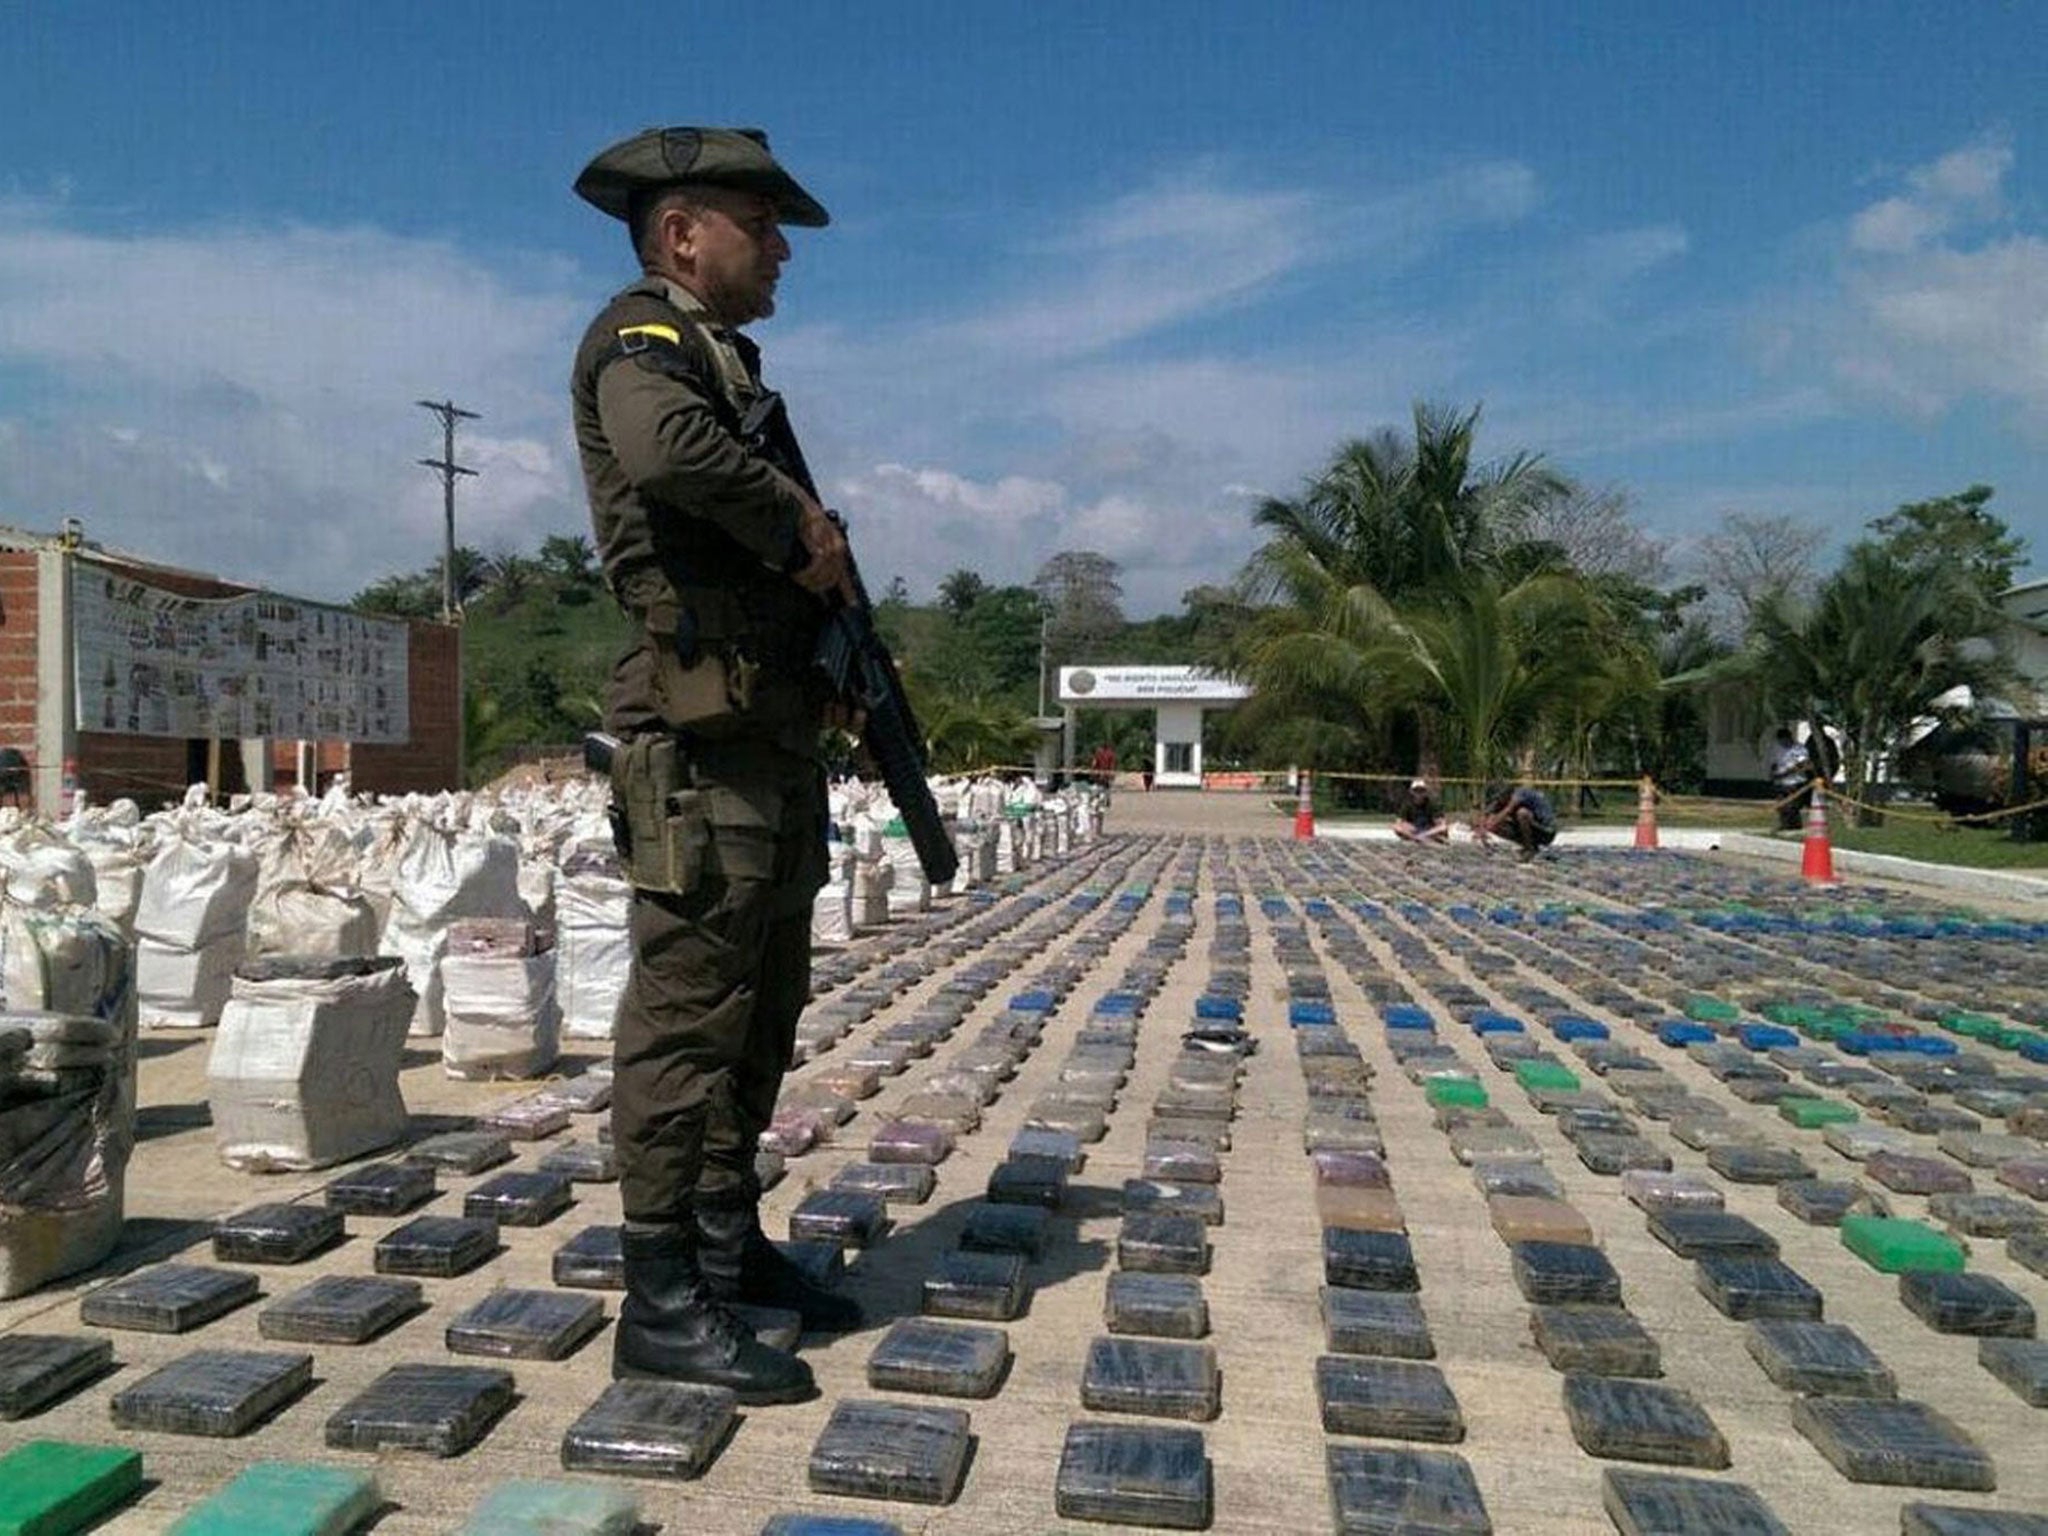 A Colombian police officer stands guard over a confiscated cocaine haul; Mr Ortega says he was an innocent victim of the war on drugs